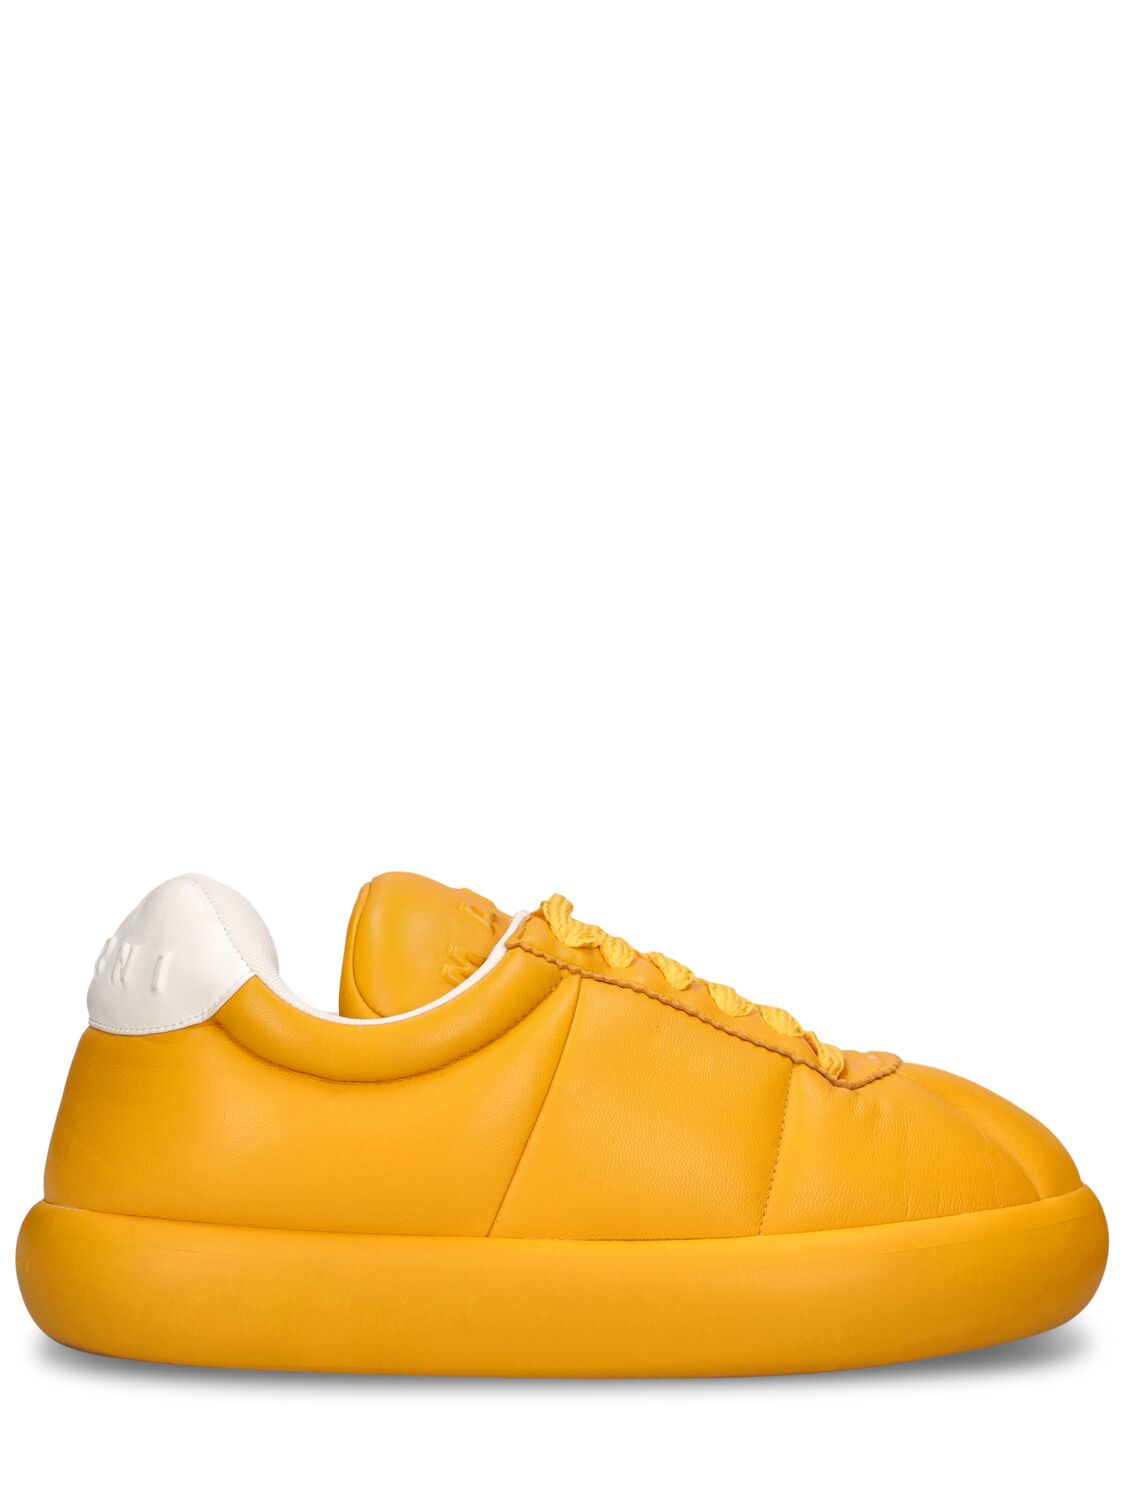 Image of Puffy Soft Leather Low Top Sneakers